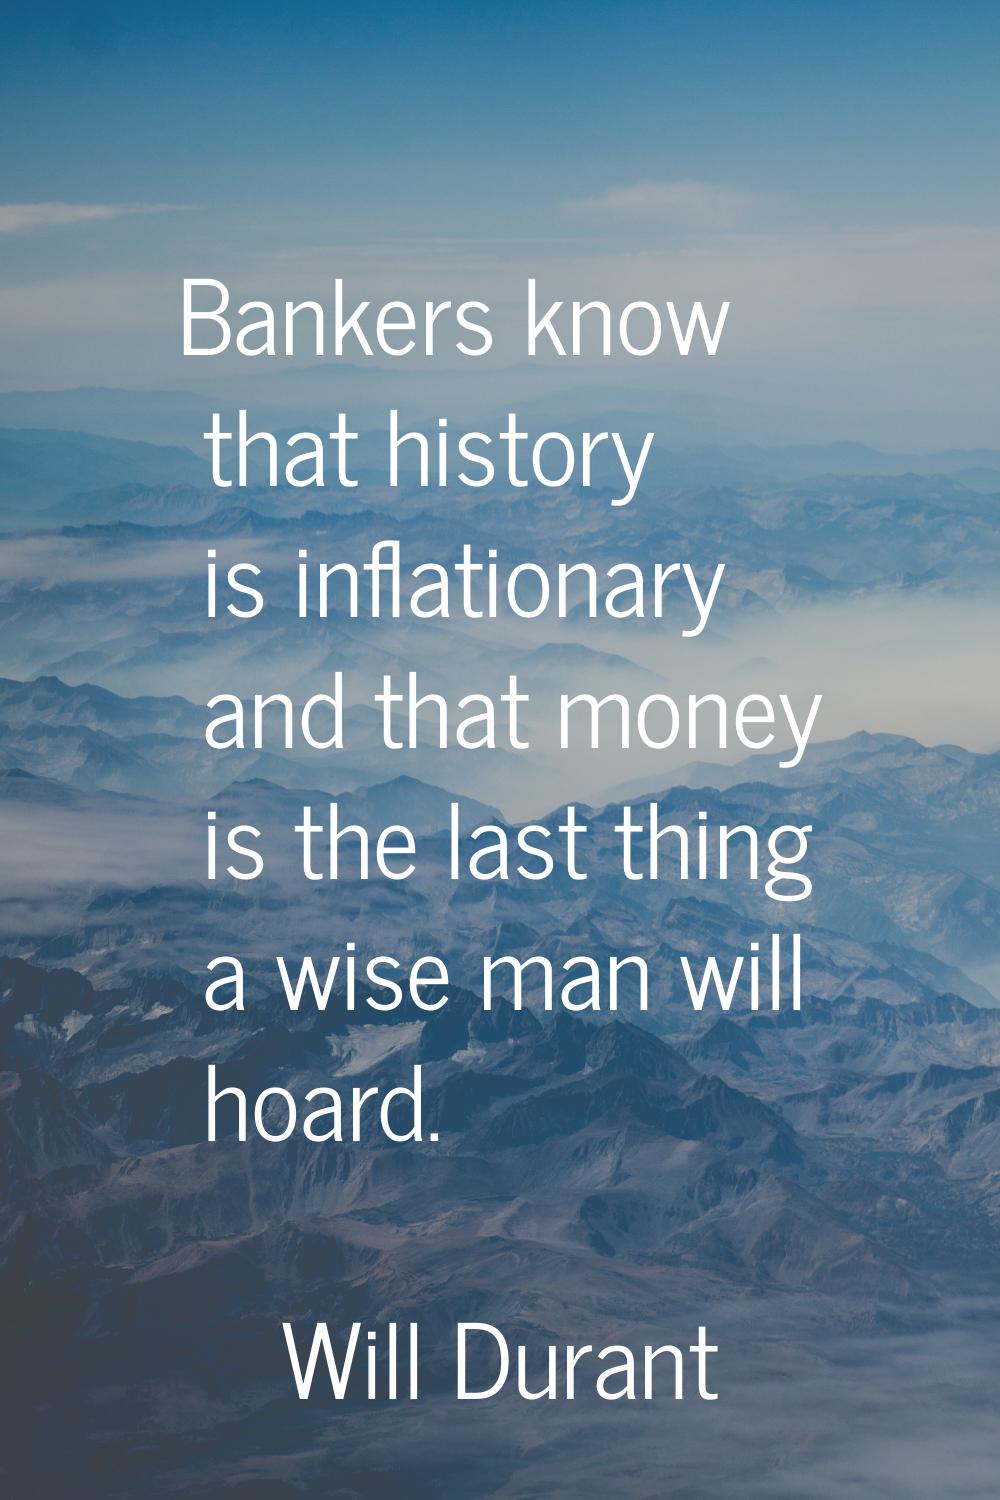 Bankers know that history is inflationary and that money is the last thing a wise man will hoard.